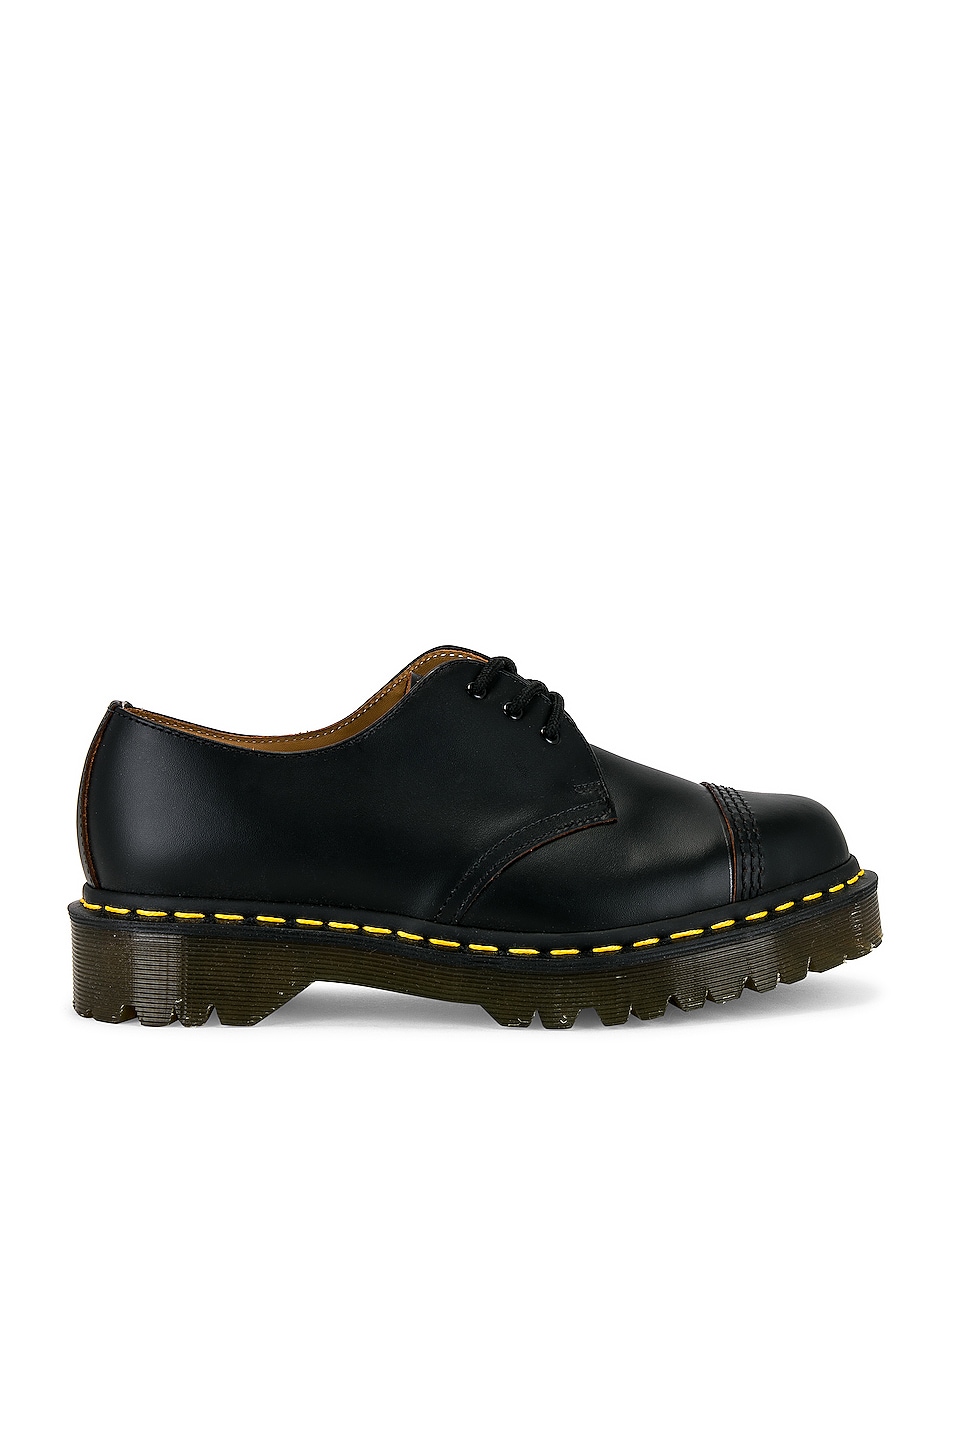 Image 1 of Dr. Martens Made in England 1461 Bex Toe Cap in Black